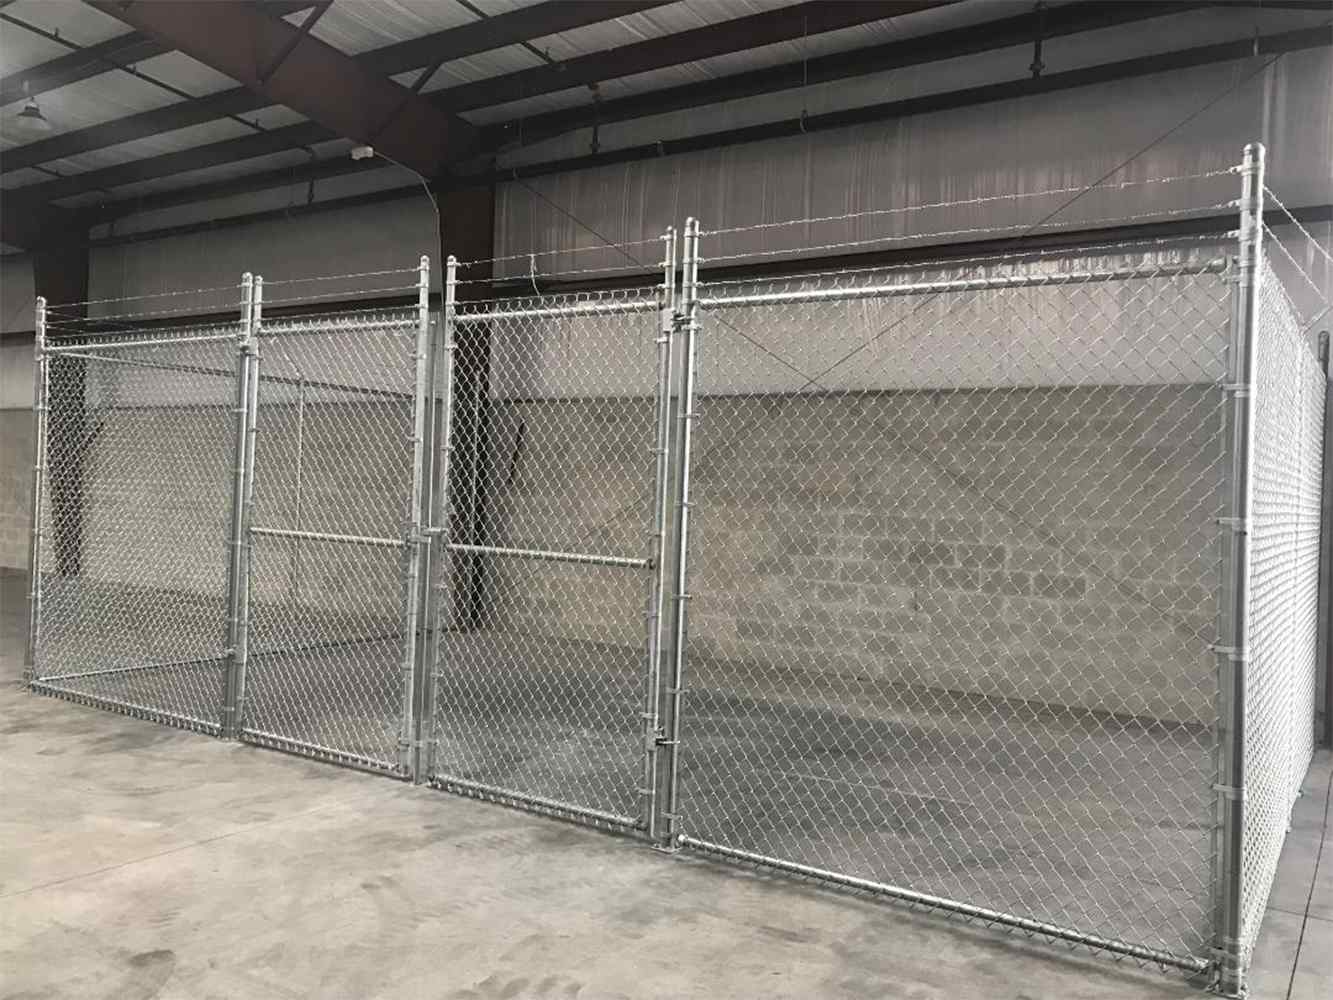 Commercial galvanized chain link fence installation company in Sarasota Florida